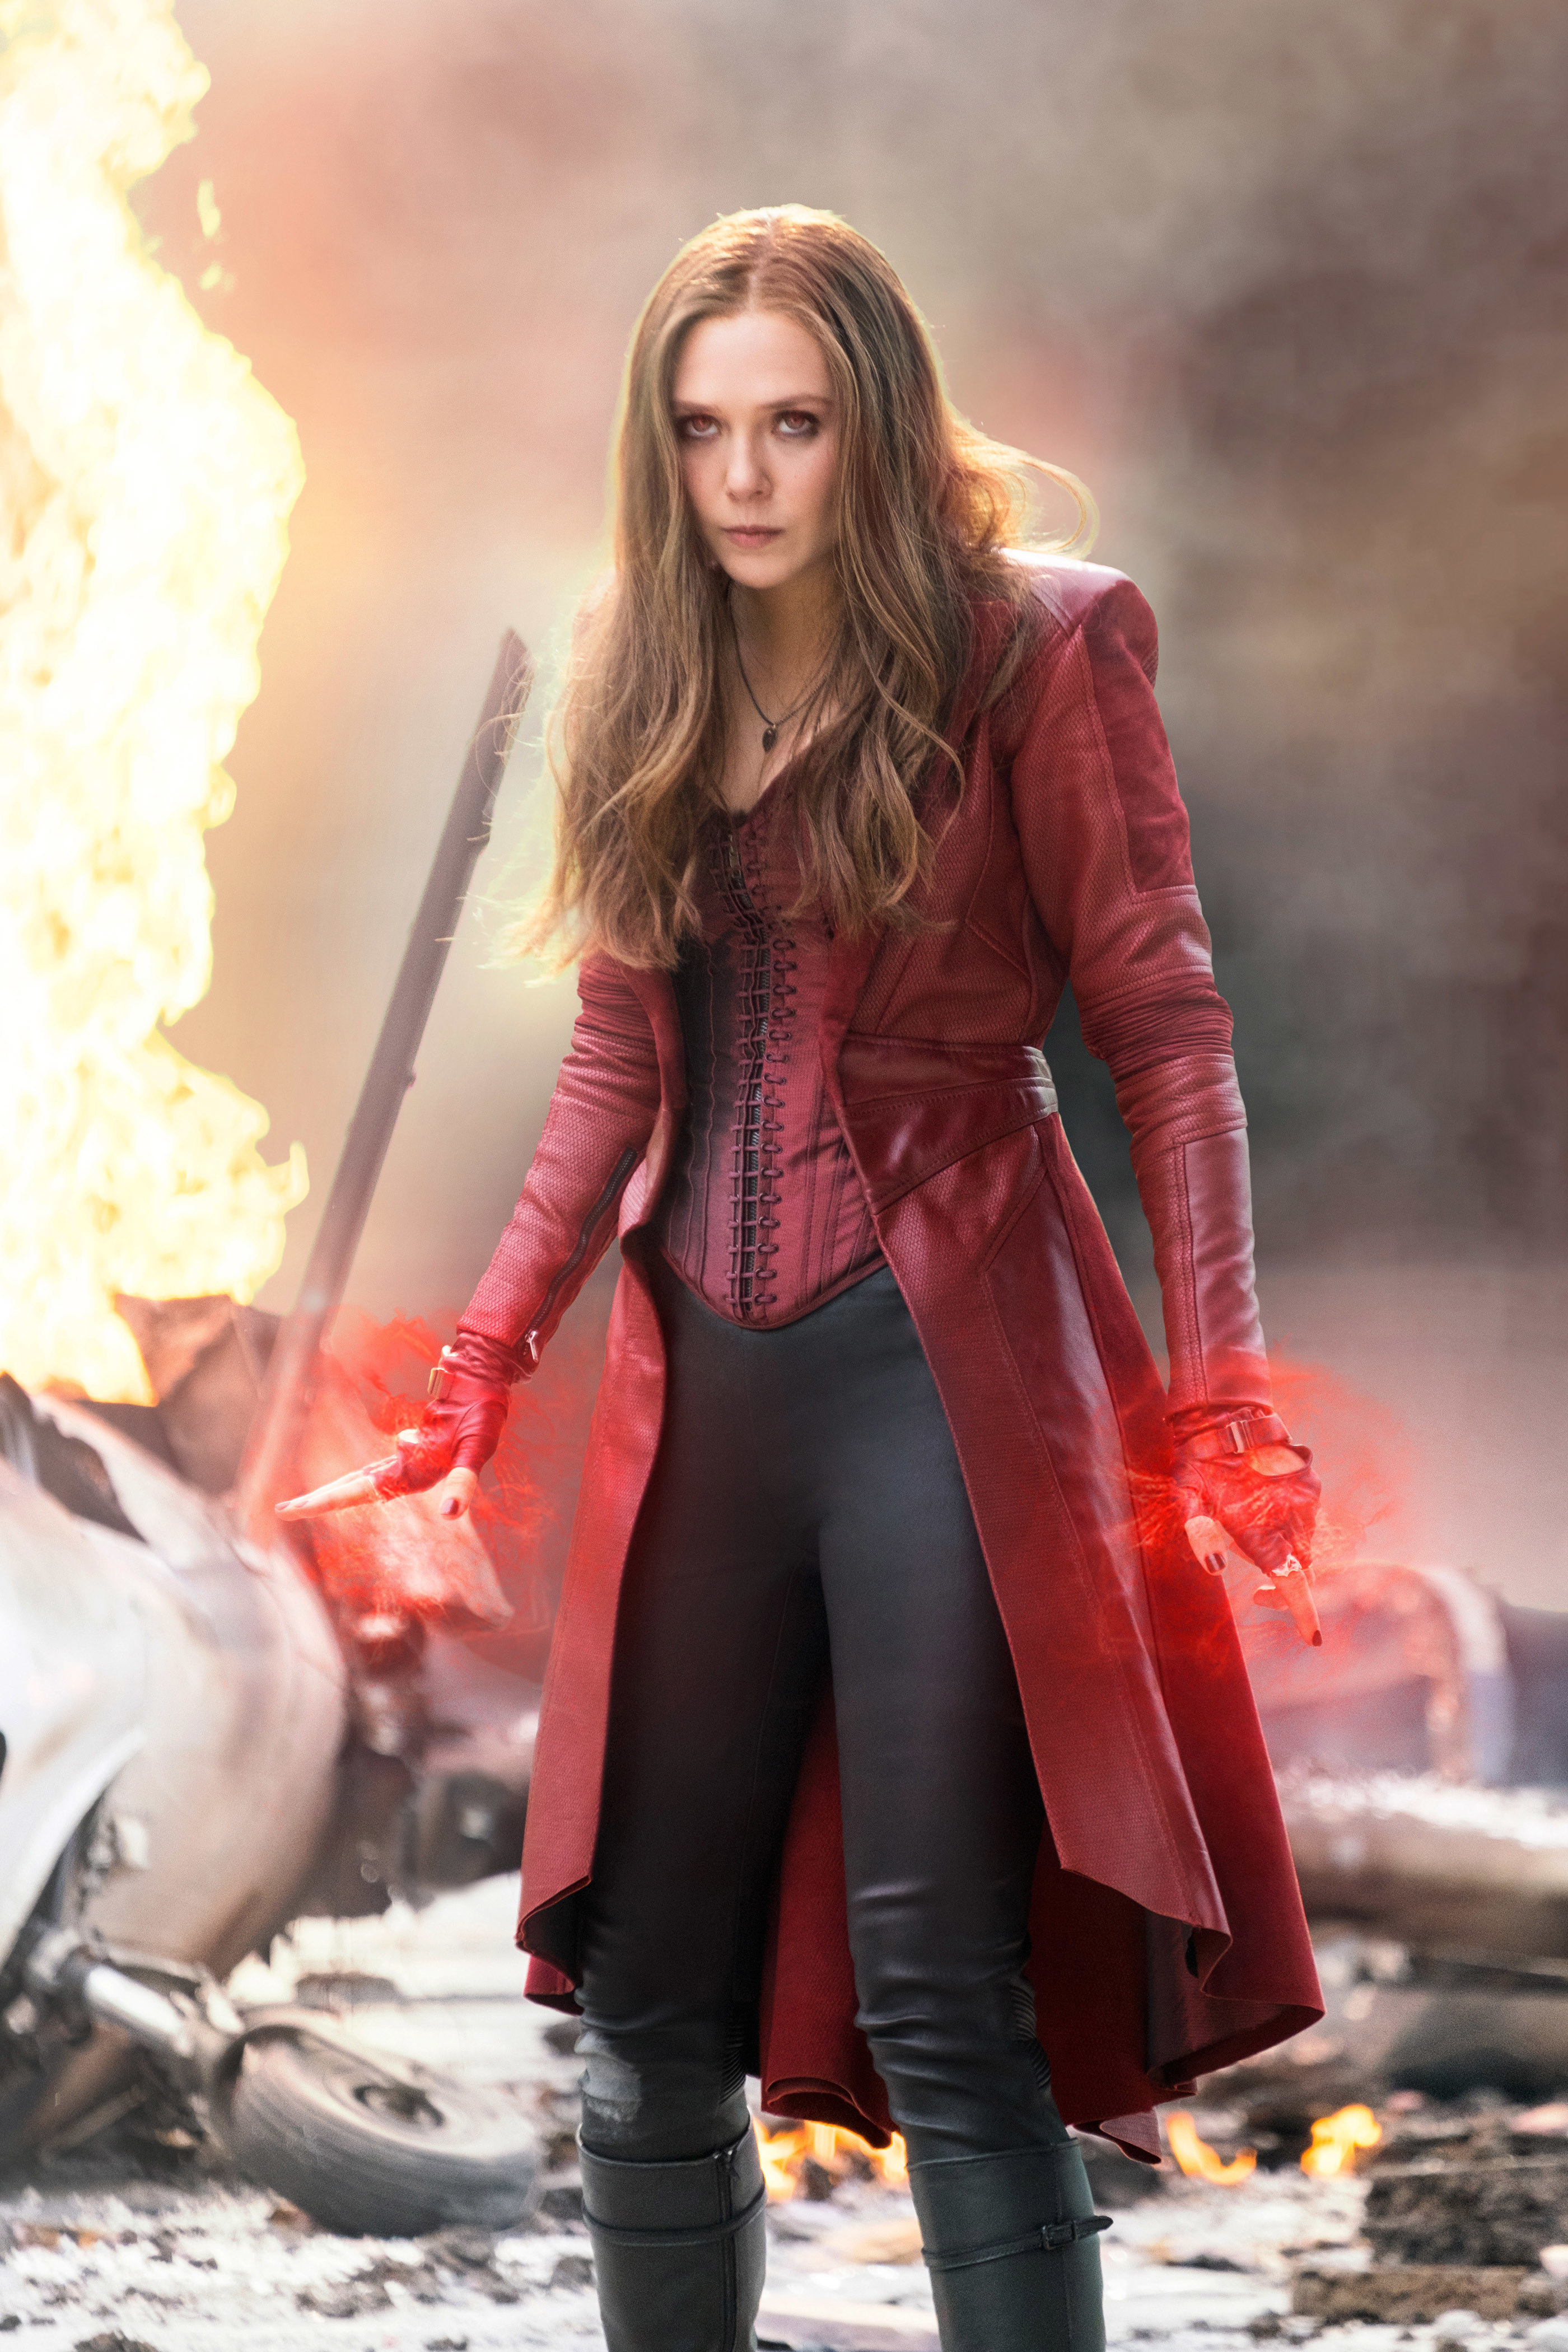 Scarlet Witch in her corseted costume